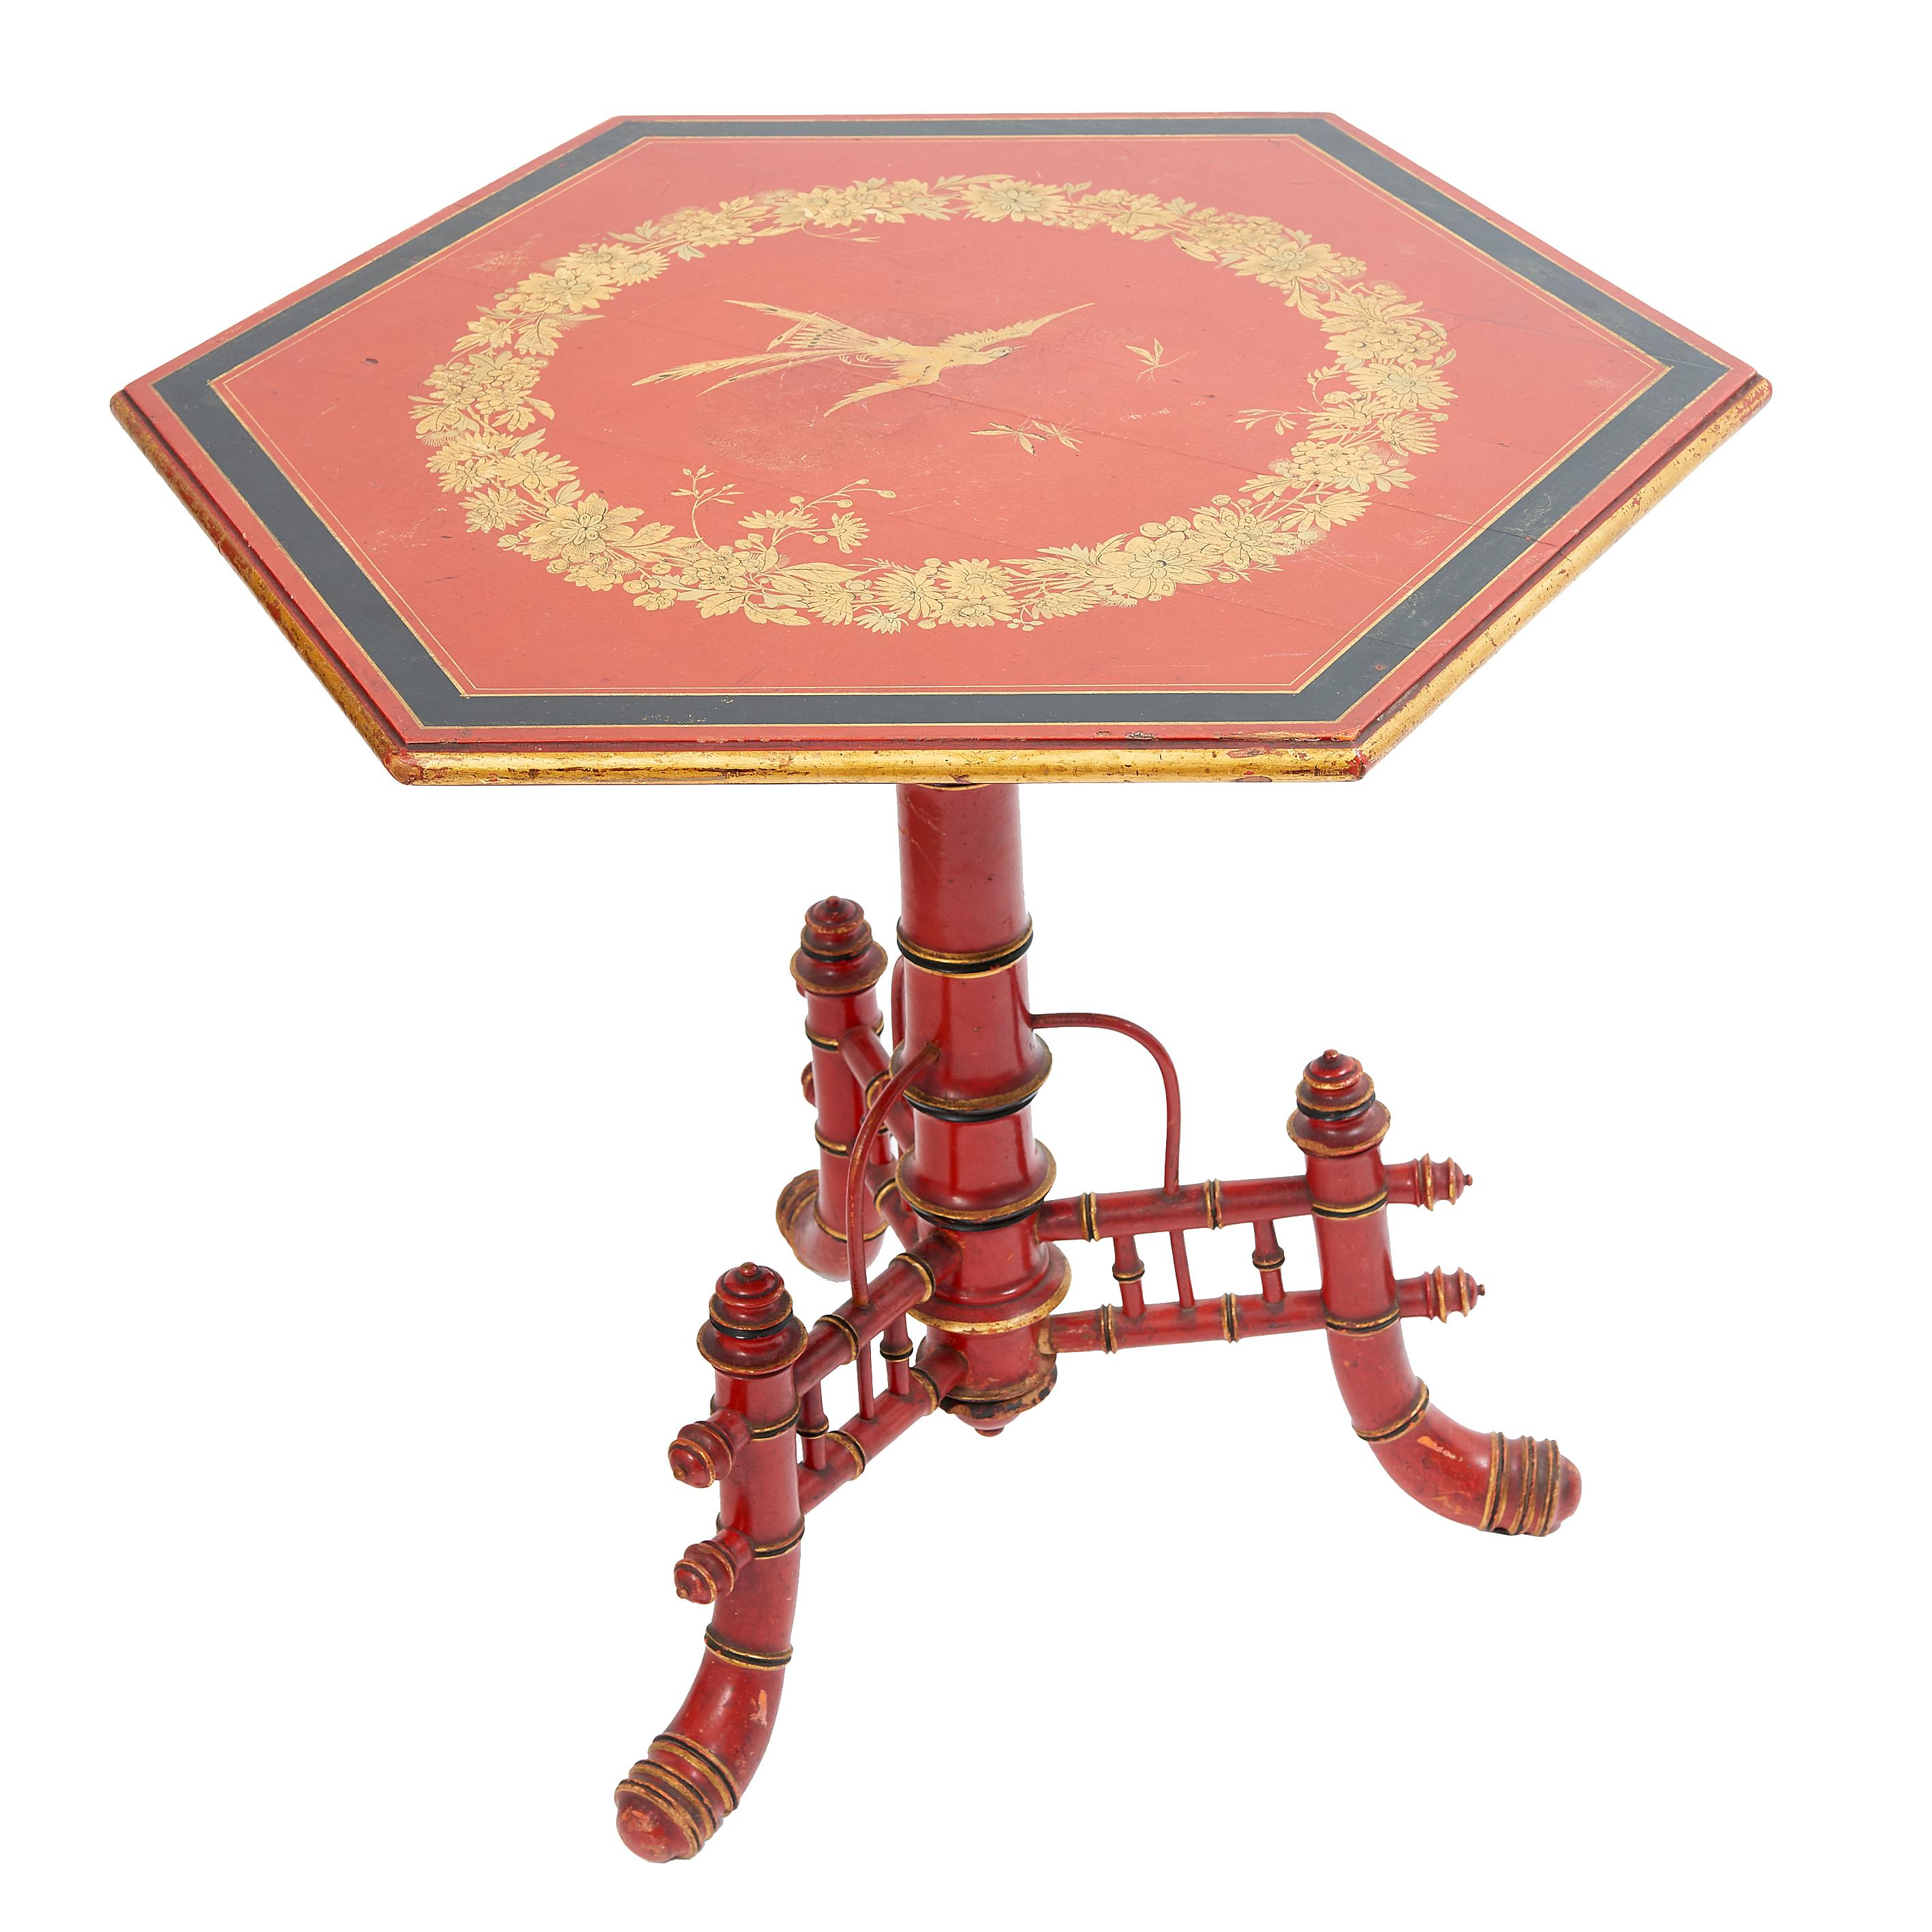 French Louis Philippe Red Lacquer Hexagonal Tilt Top Gueridon, circa 1845 For Sale